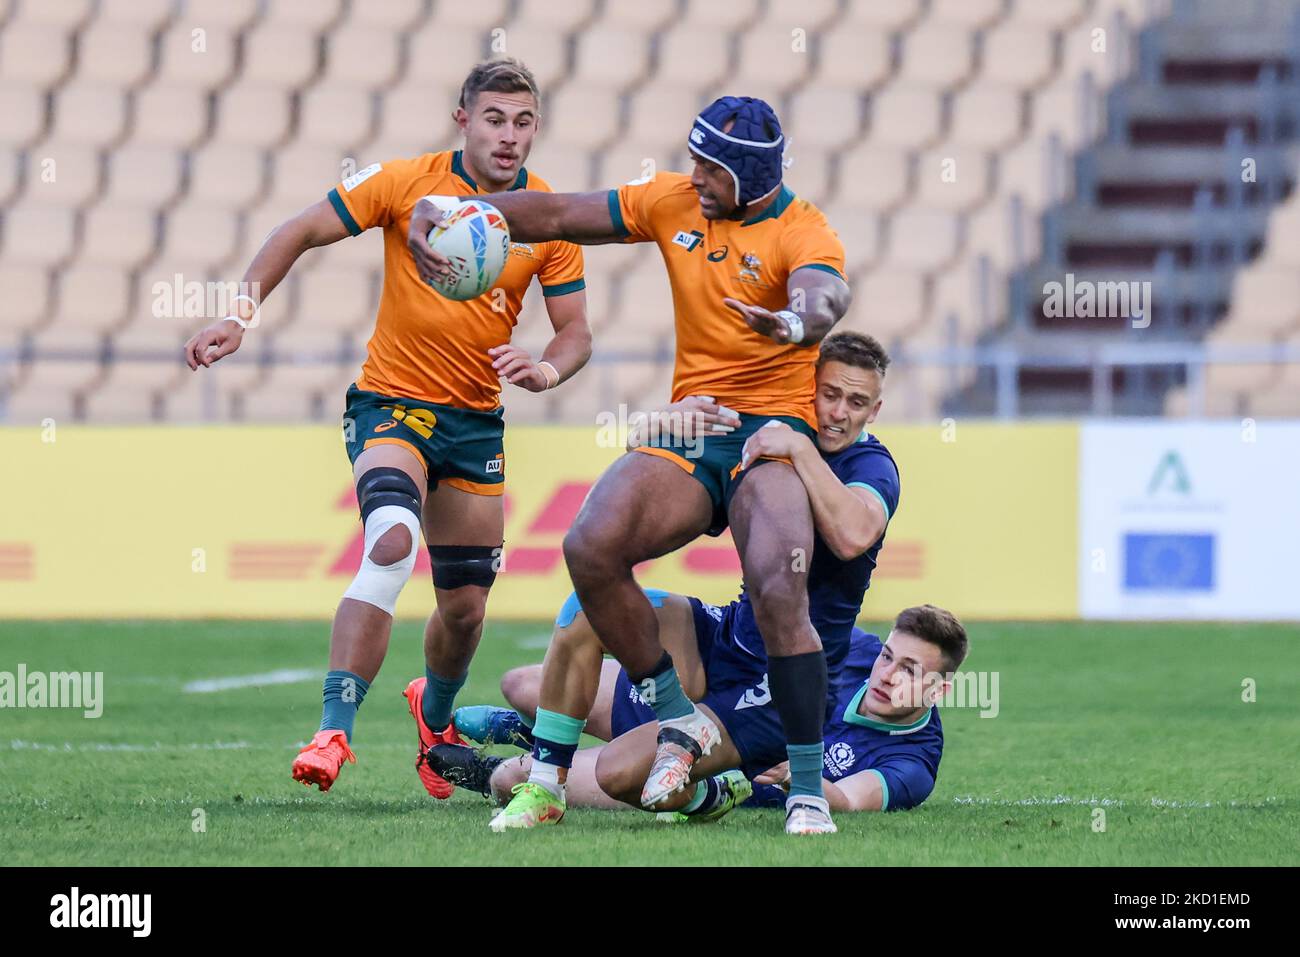 Nathan Lawson of Australian in action during the Men's HSBC World Rugby Sevens Series 2022 match between Australian and Scotland at the La Cartuja stadium in Seville, on January 28, 2022. (Photo by DAX Images/NurPhoto) Stock Photo